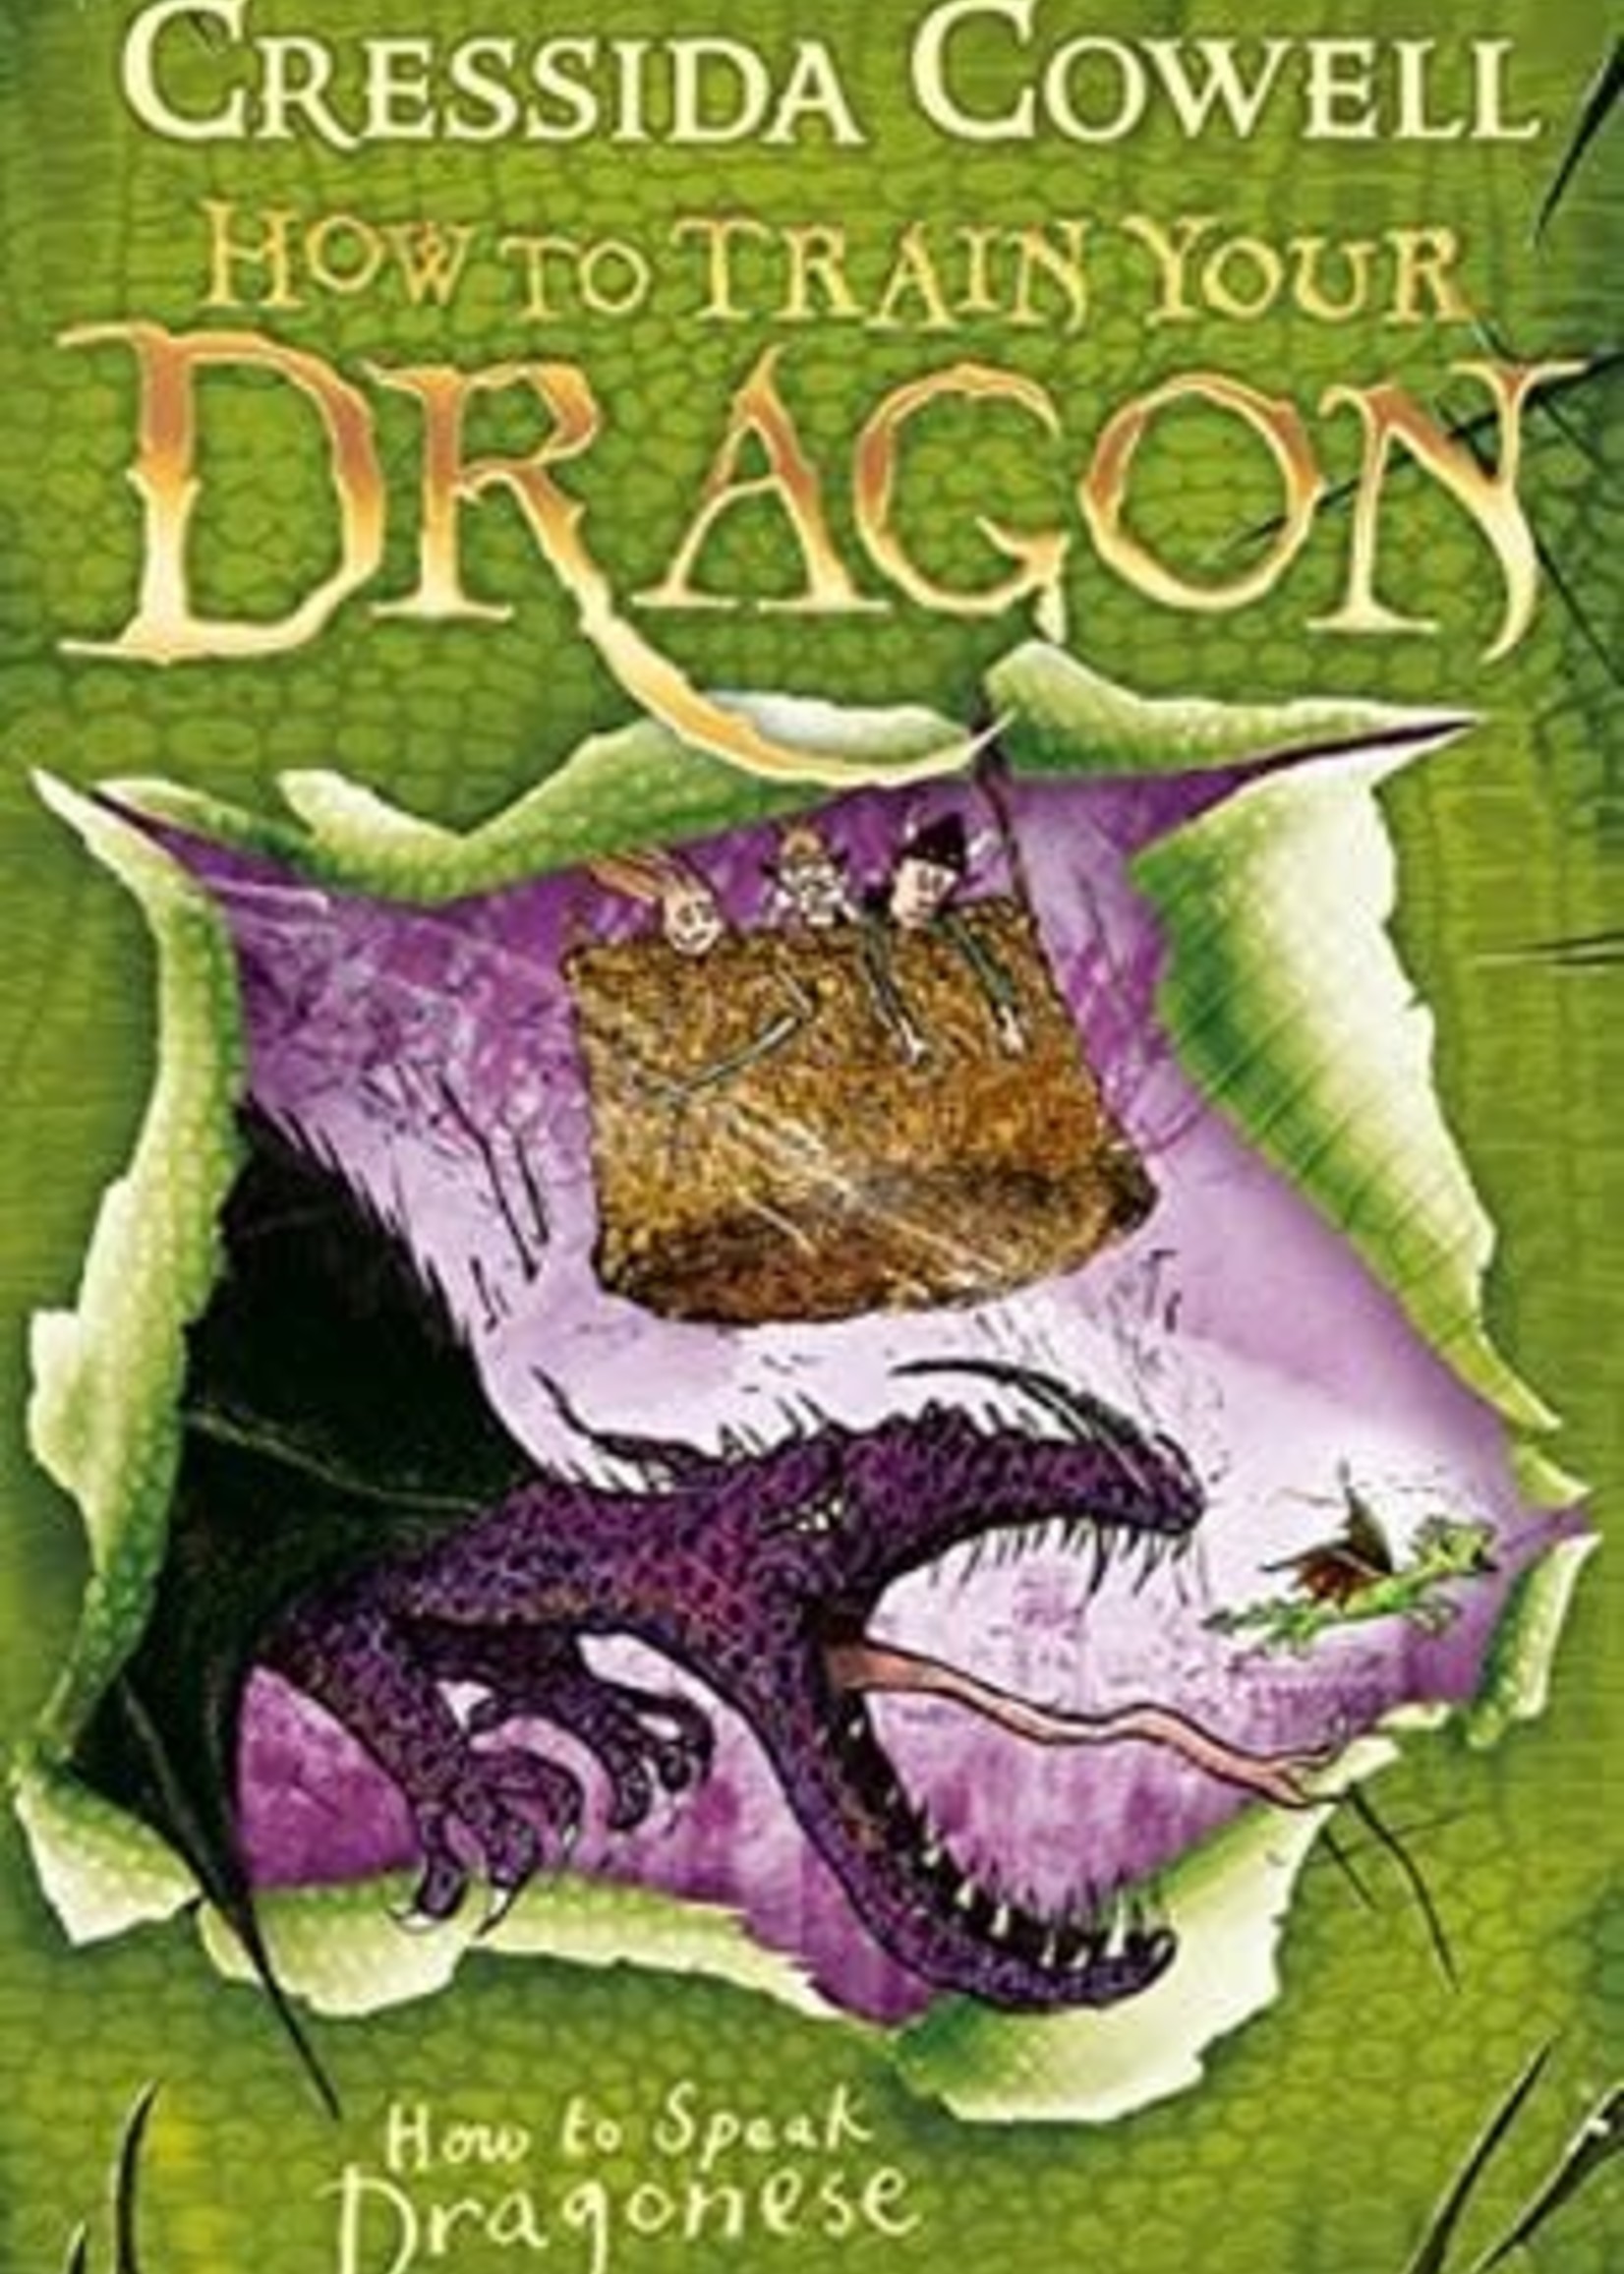 How to Speak Dragonese (How to Train Your Dragon #3) by Cressida Cowell